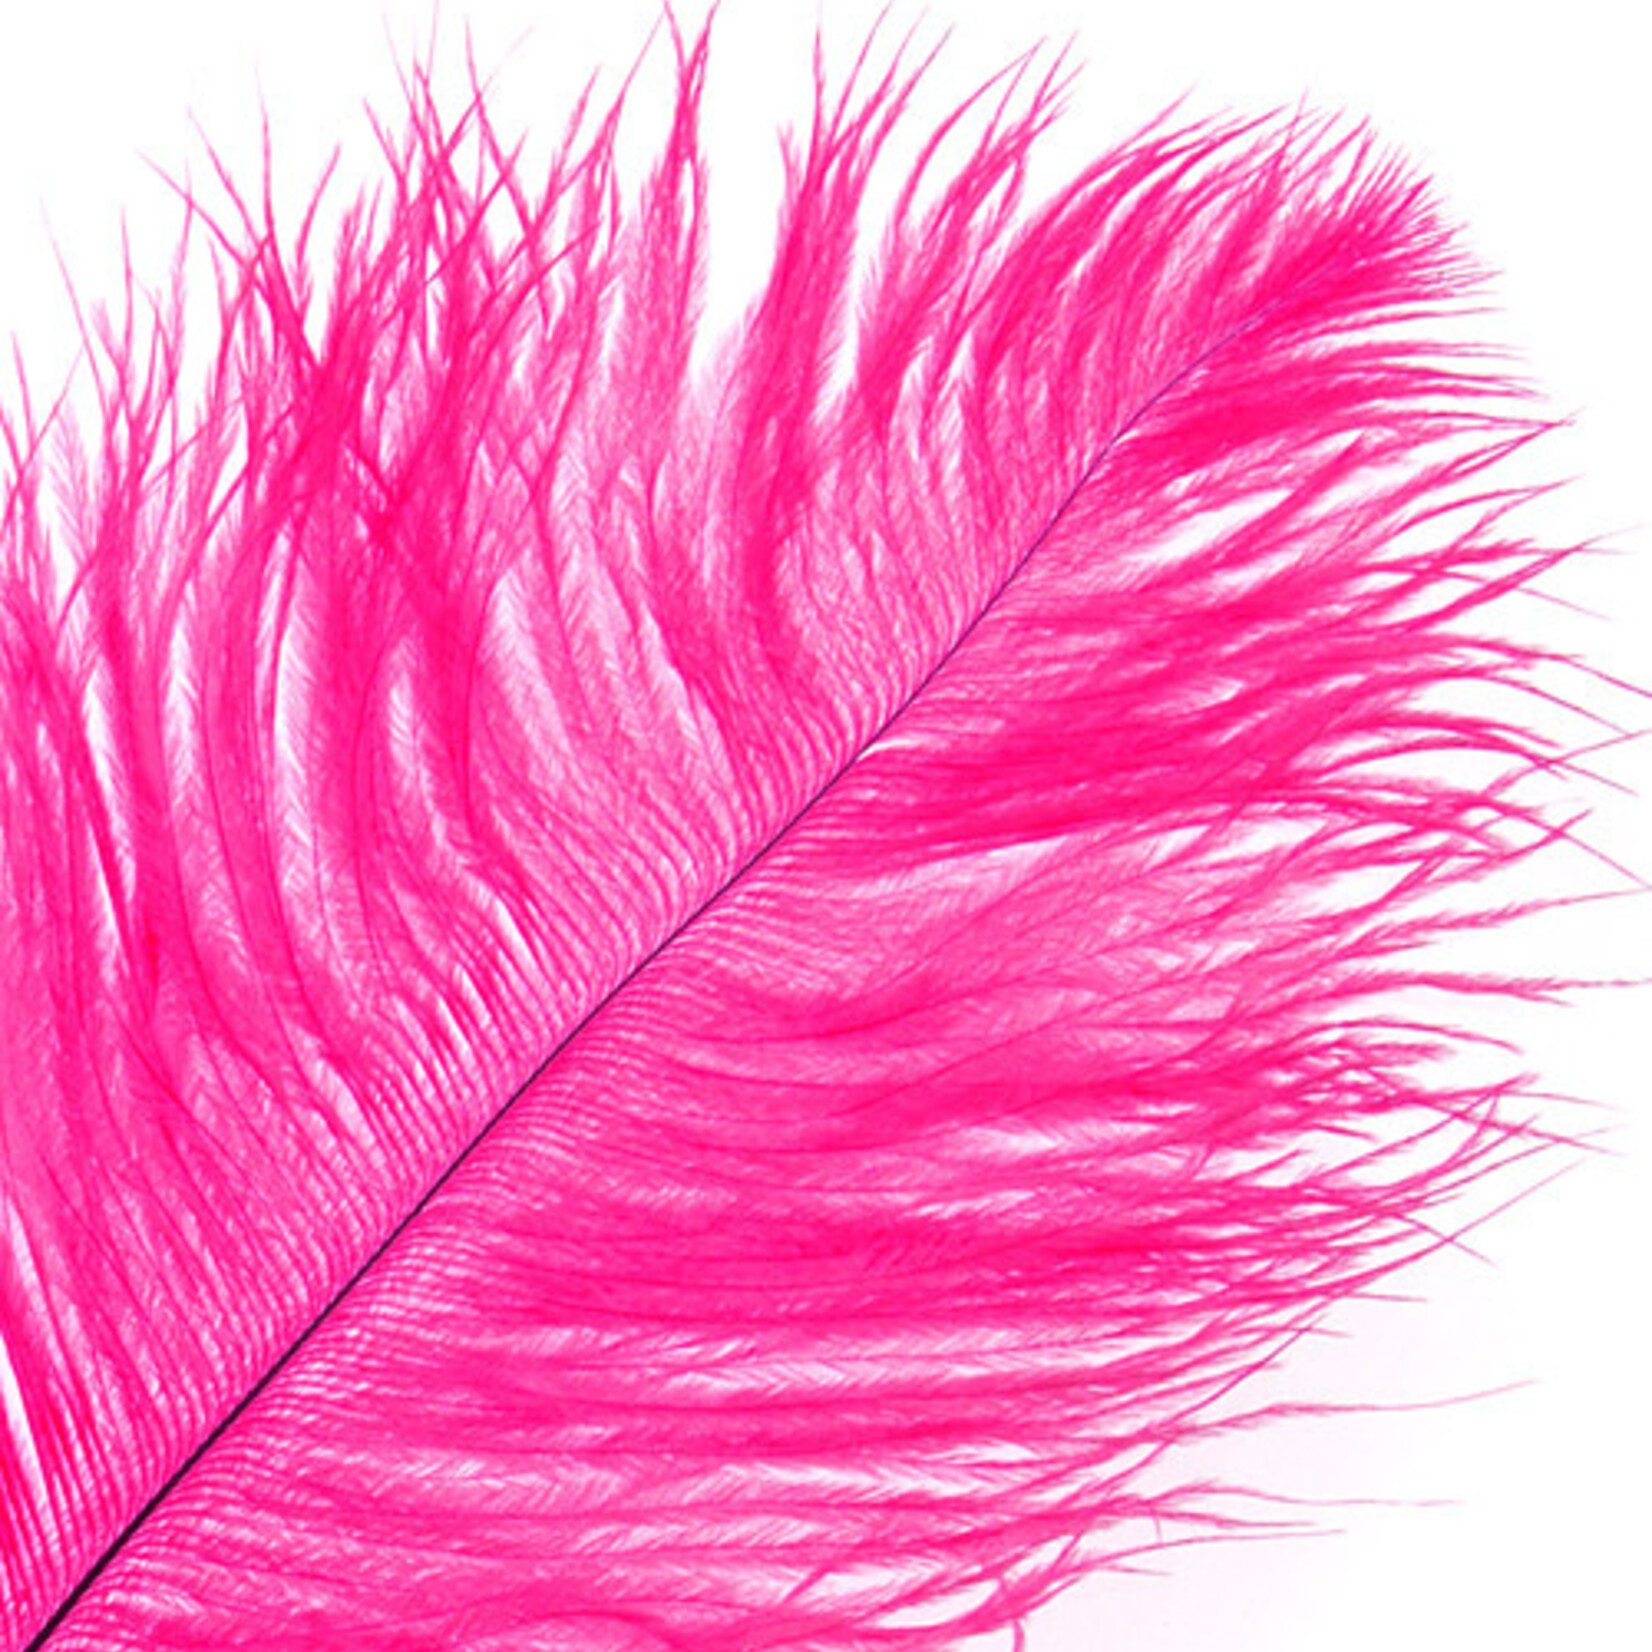 O.D Plumes 14-16 Inch Hot Pink